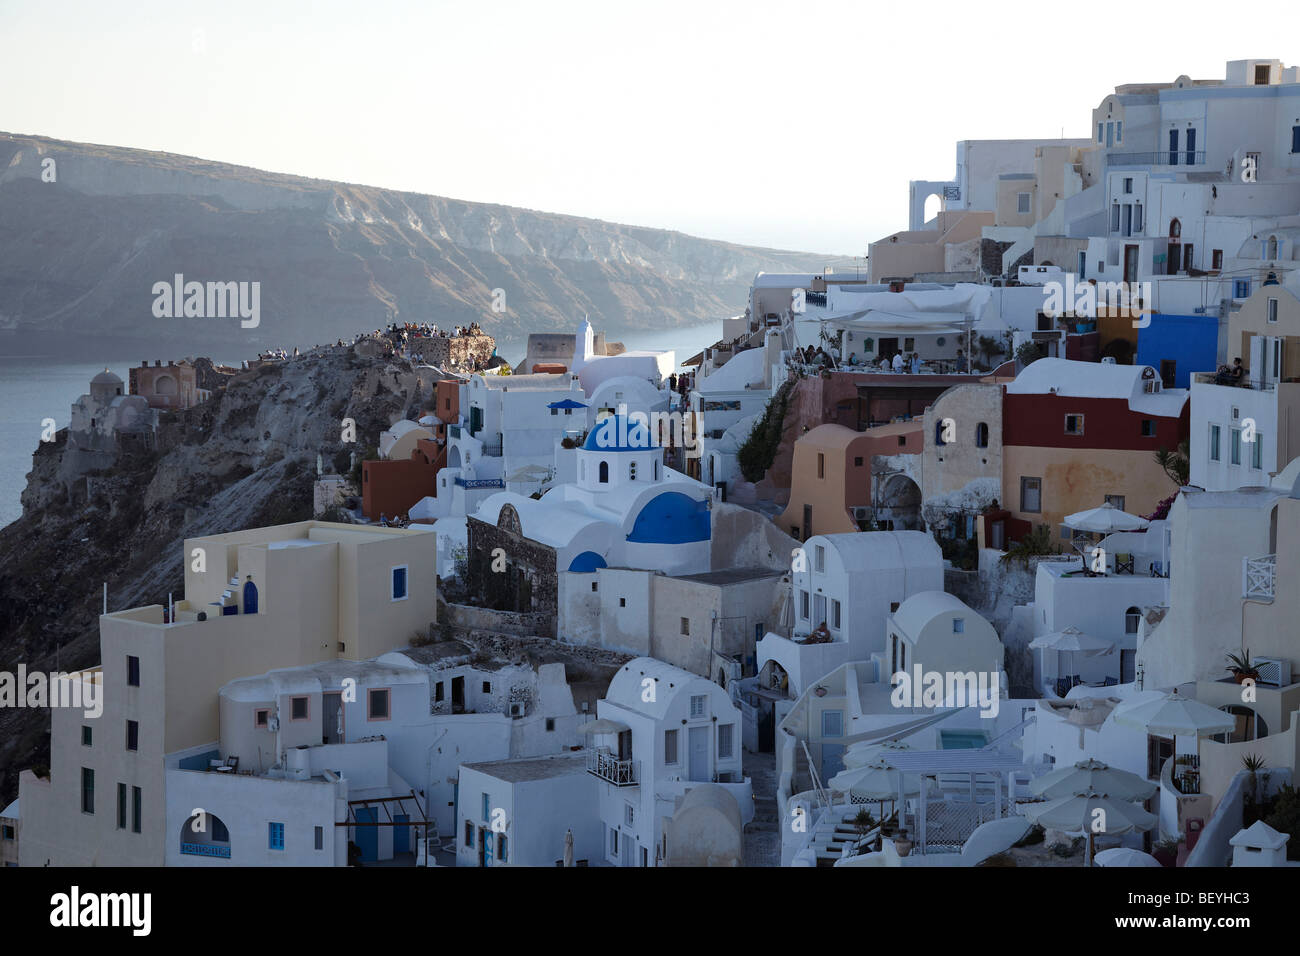 View over the village of Oia and people waiting for the sunset, Santorini, Cyclades Islands, Greece Stock Photo